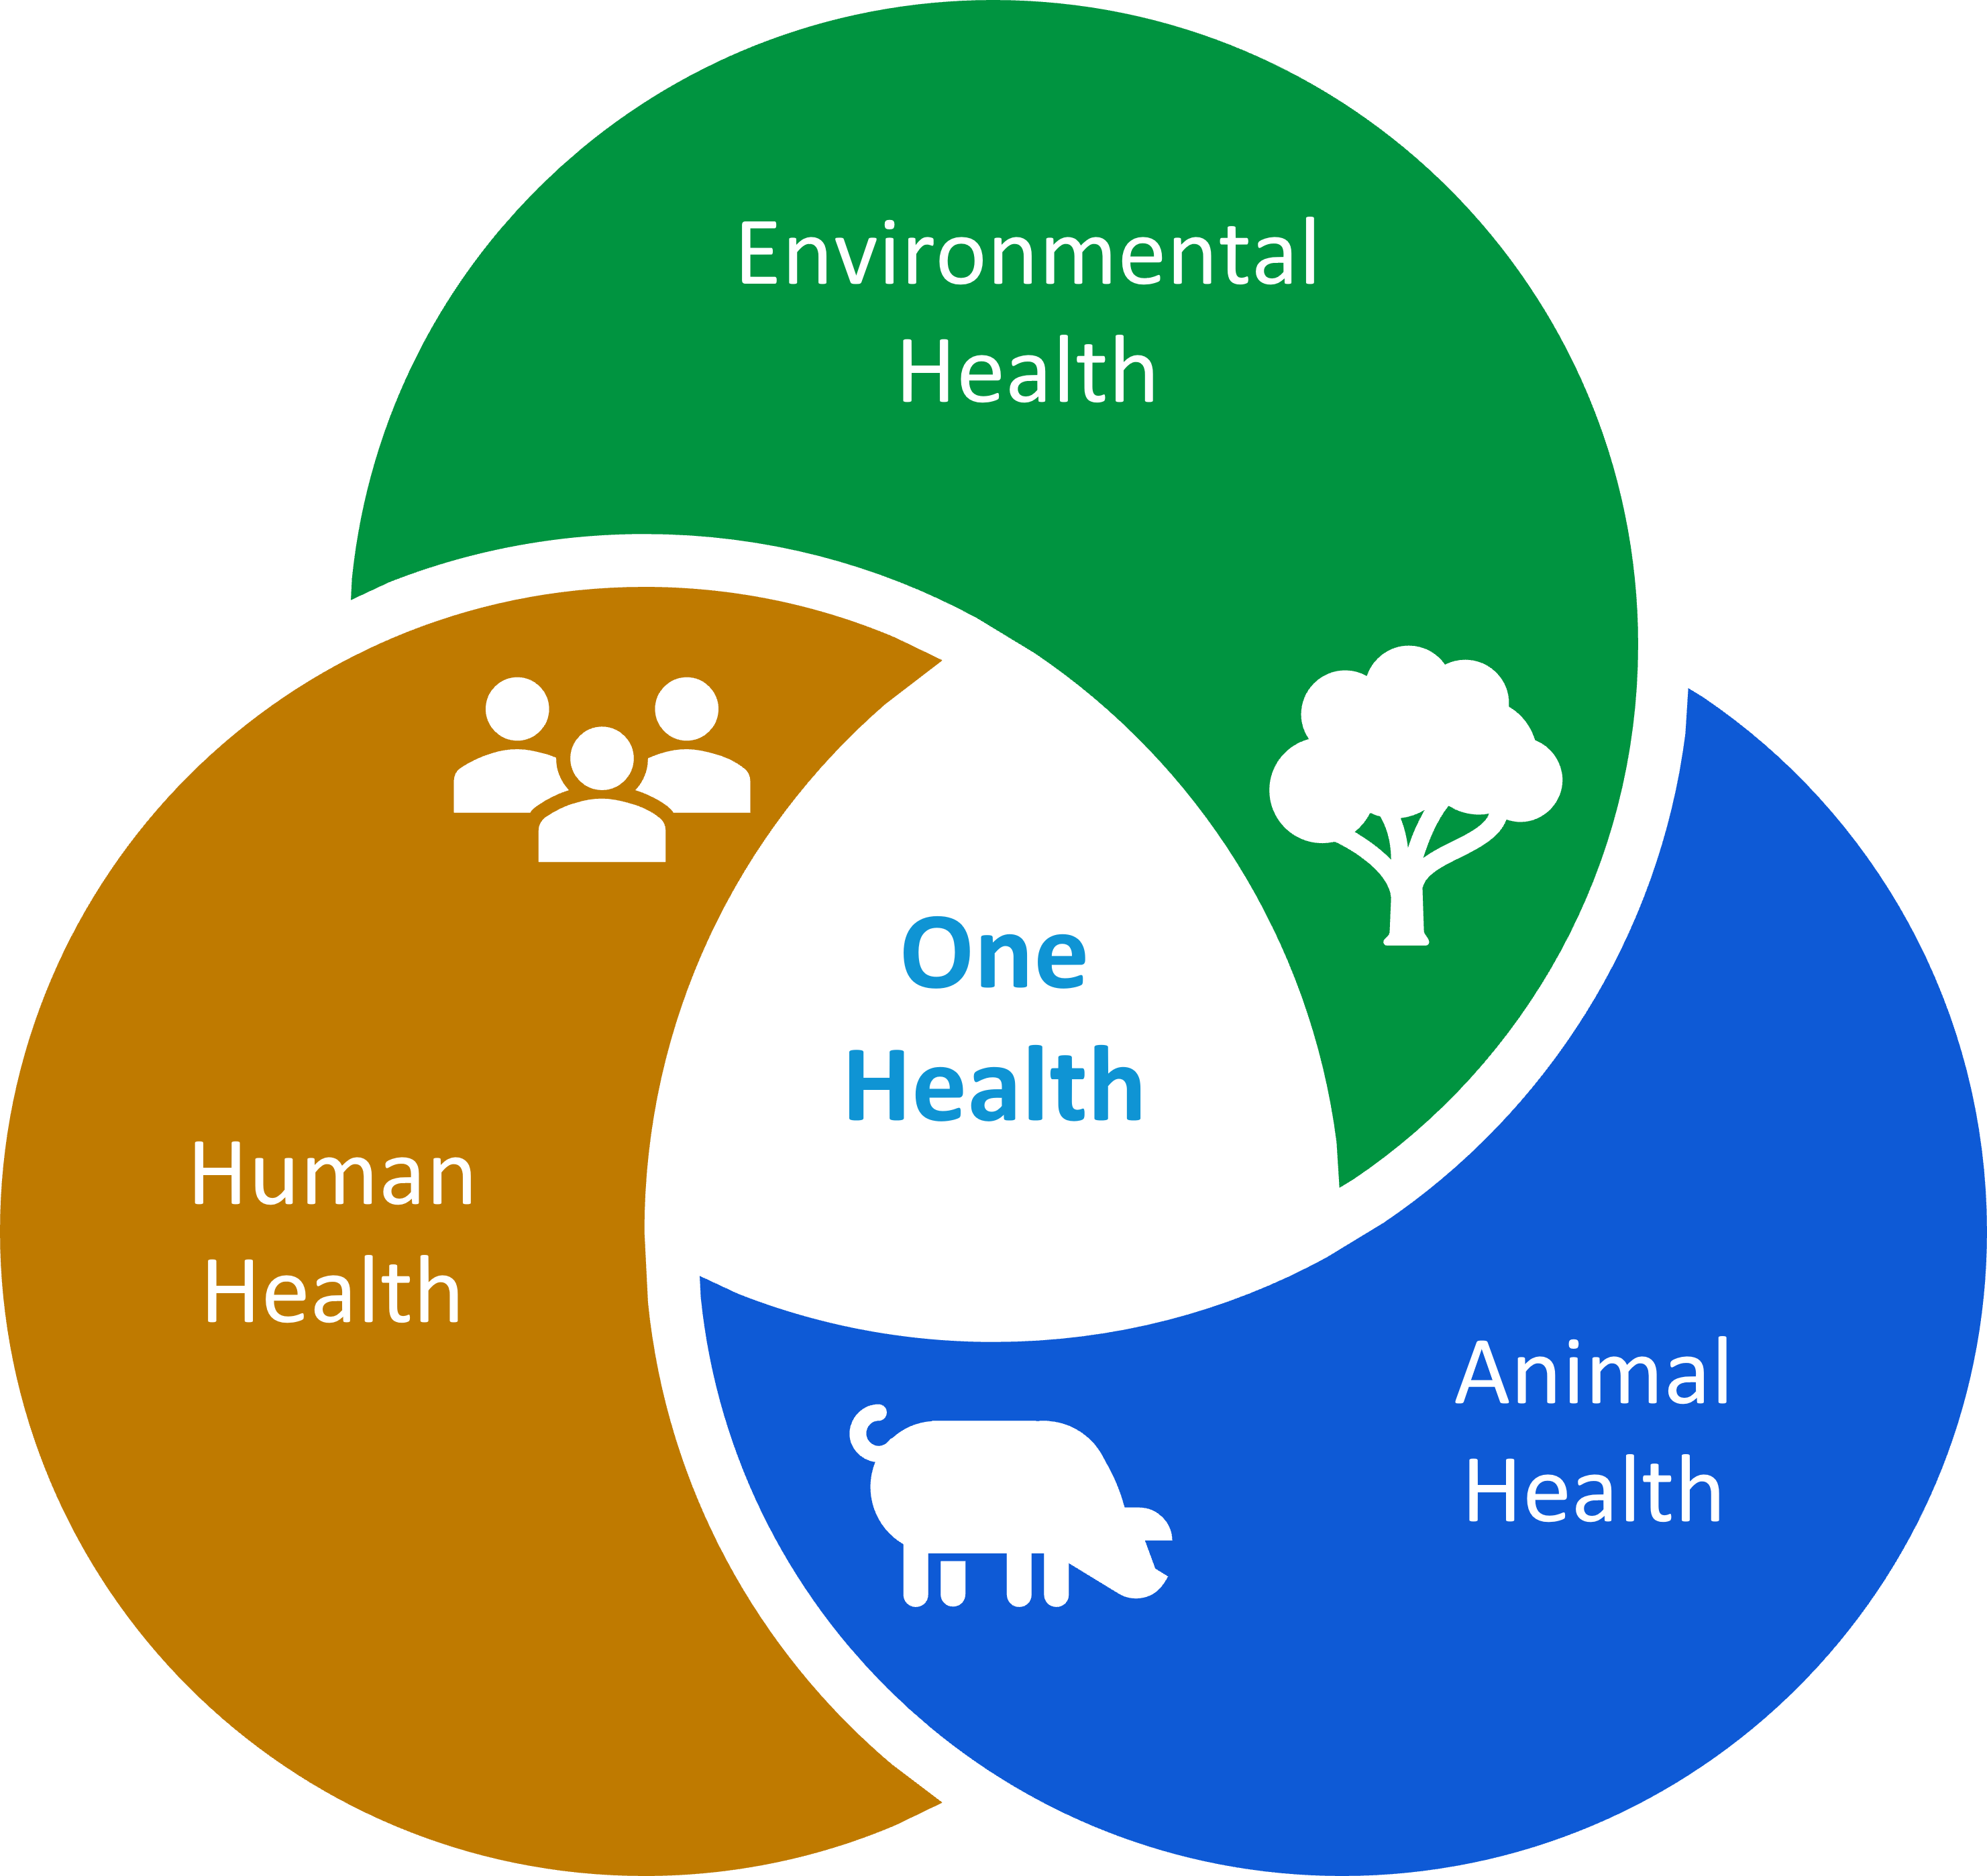 One Health issues impact the health of people, animals, and the environment